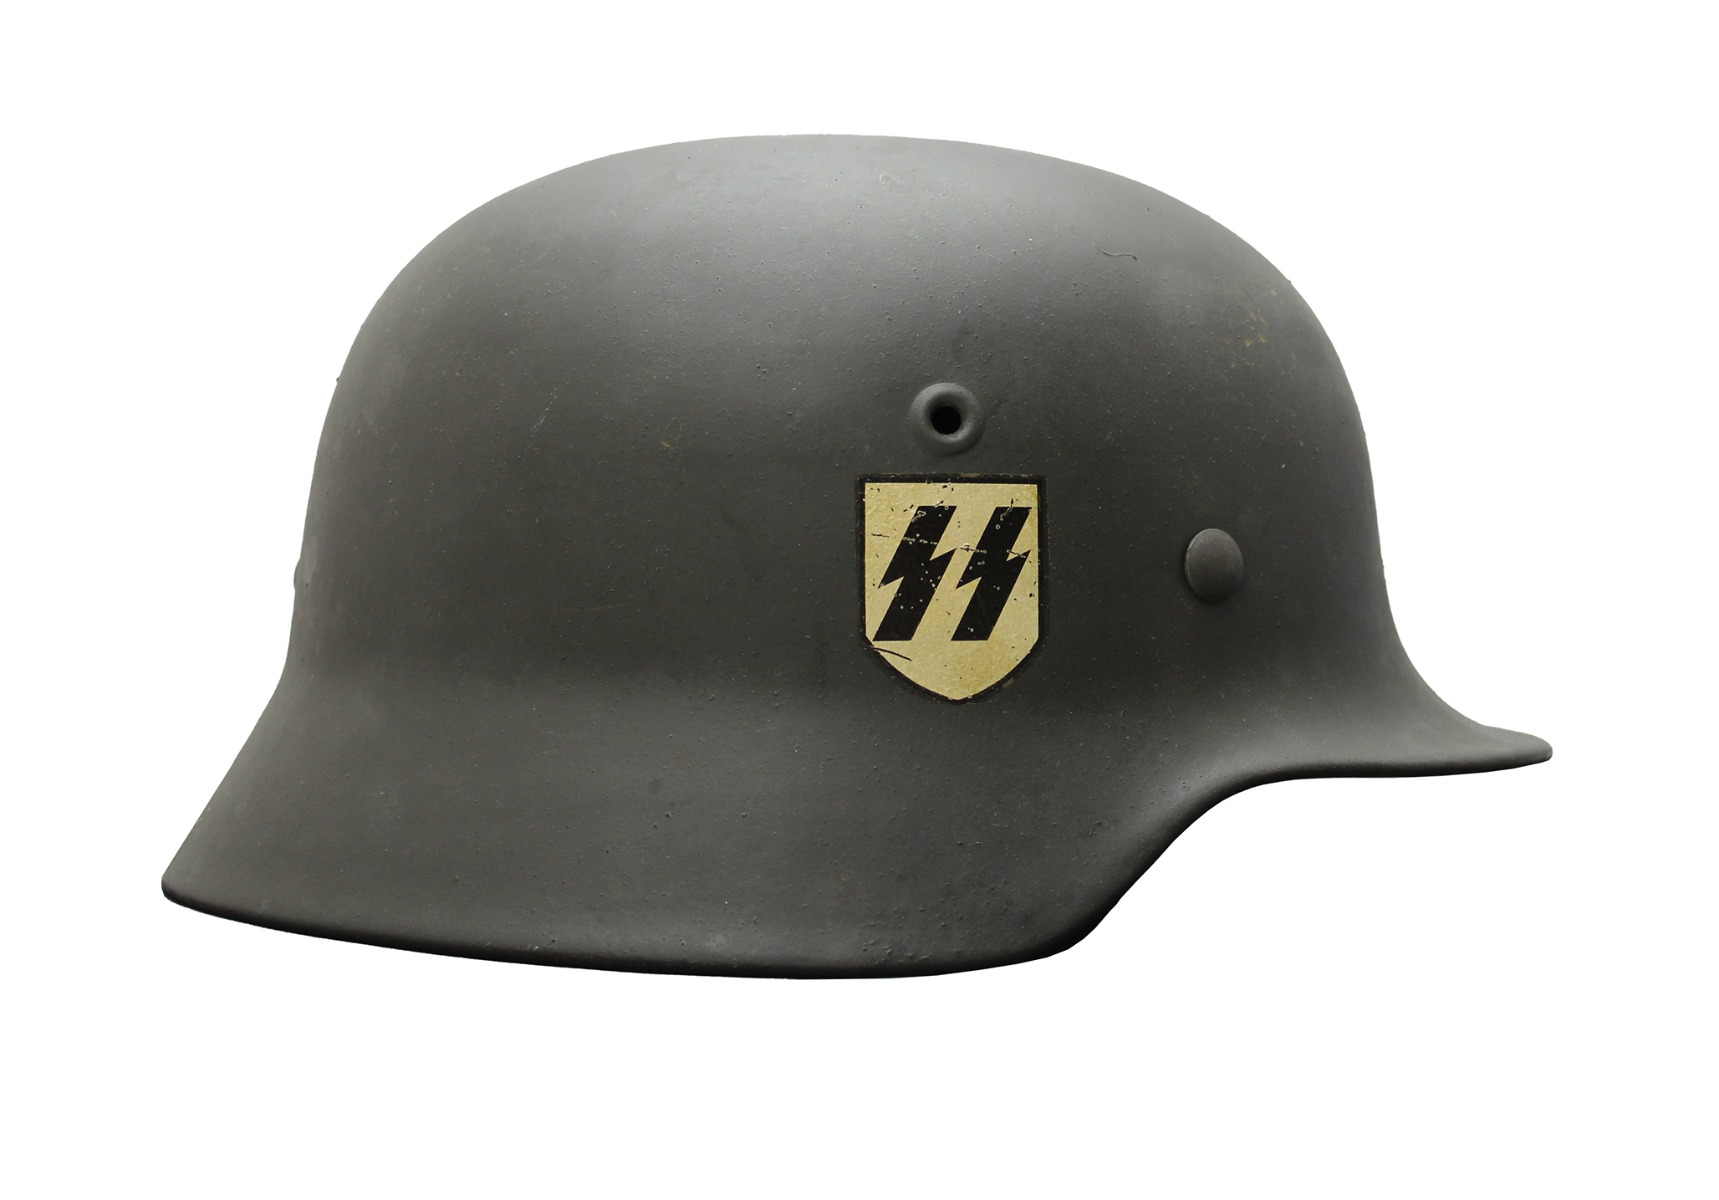  GERMAN WW2 M40 3 COLOR CAMO HELMET WITH SINGLE HEER DECAL AND CHICKEN WIRE COVER